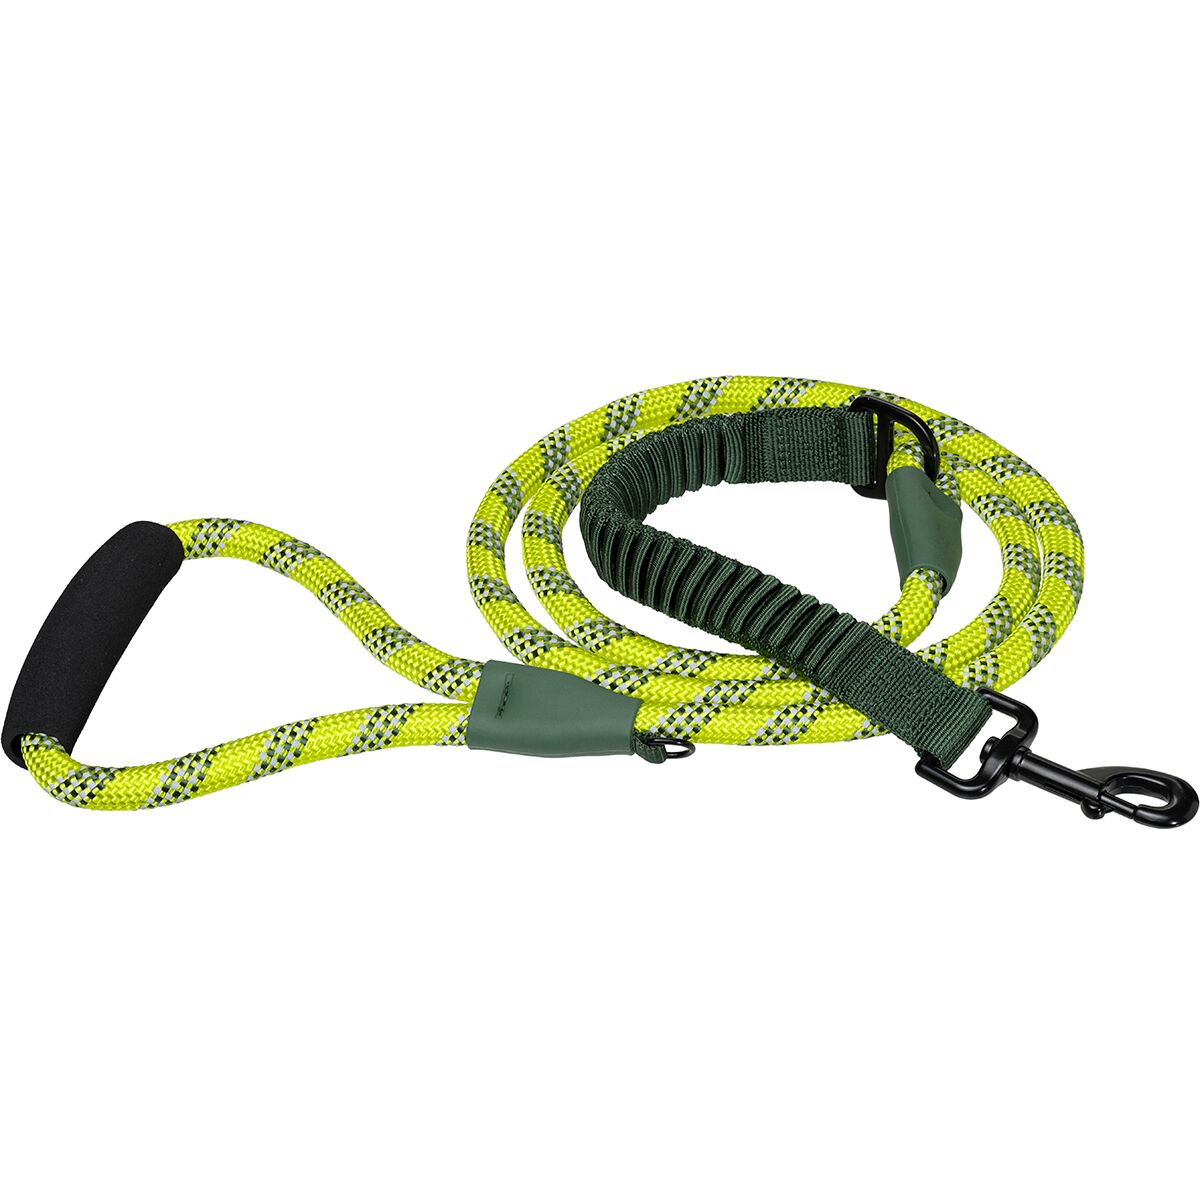 Backcountry x Petco The Rope Dog Lead